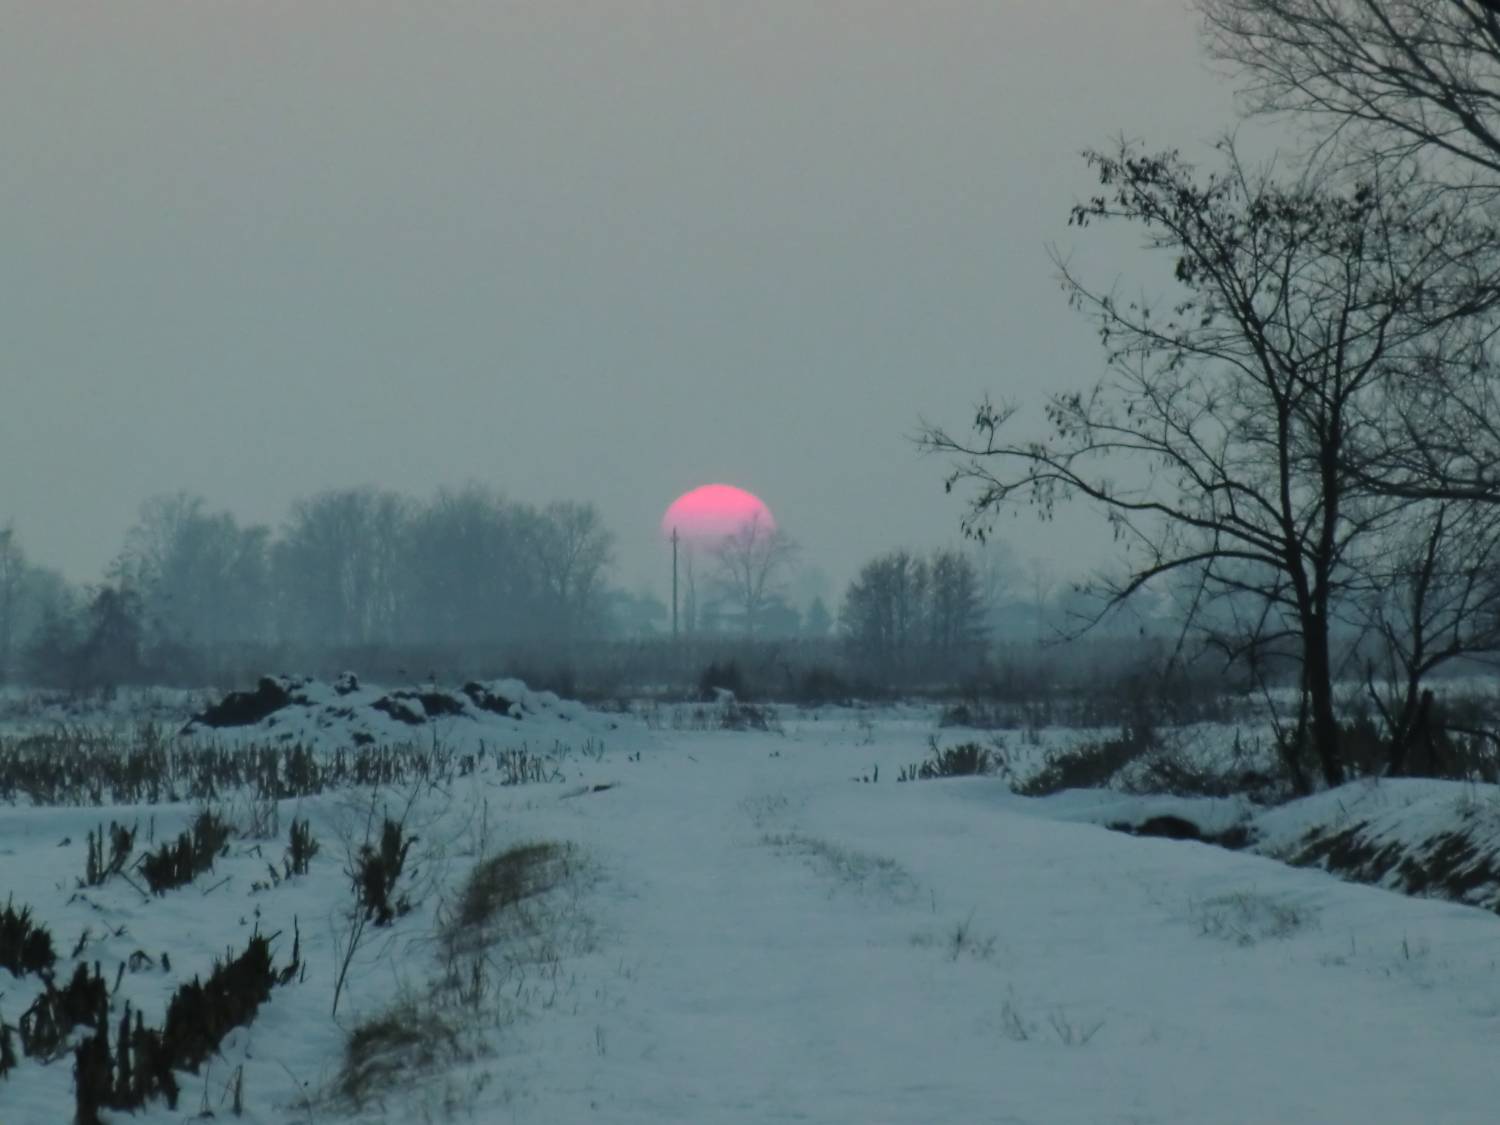 Sunset over the snow: 105 KB; click on the image to enlarge